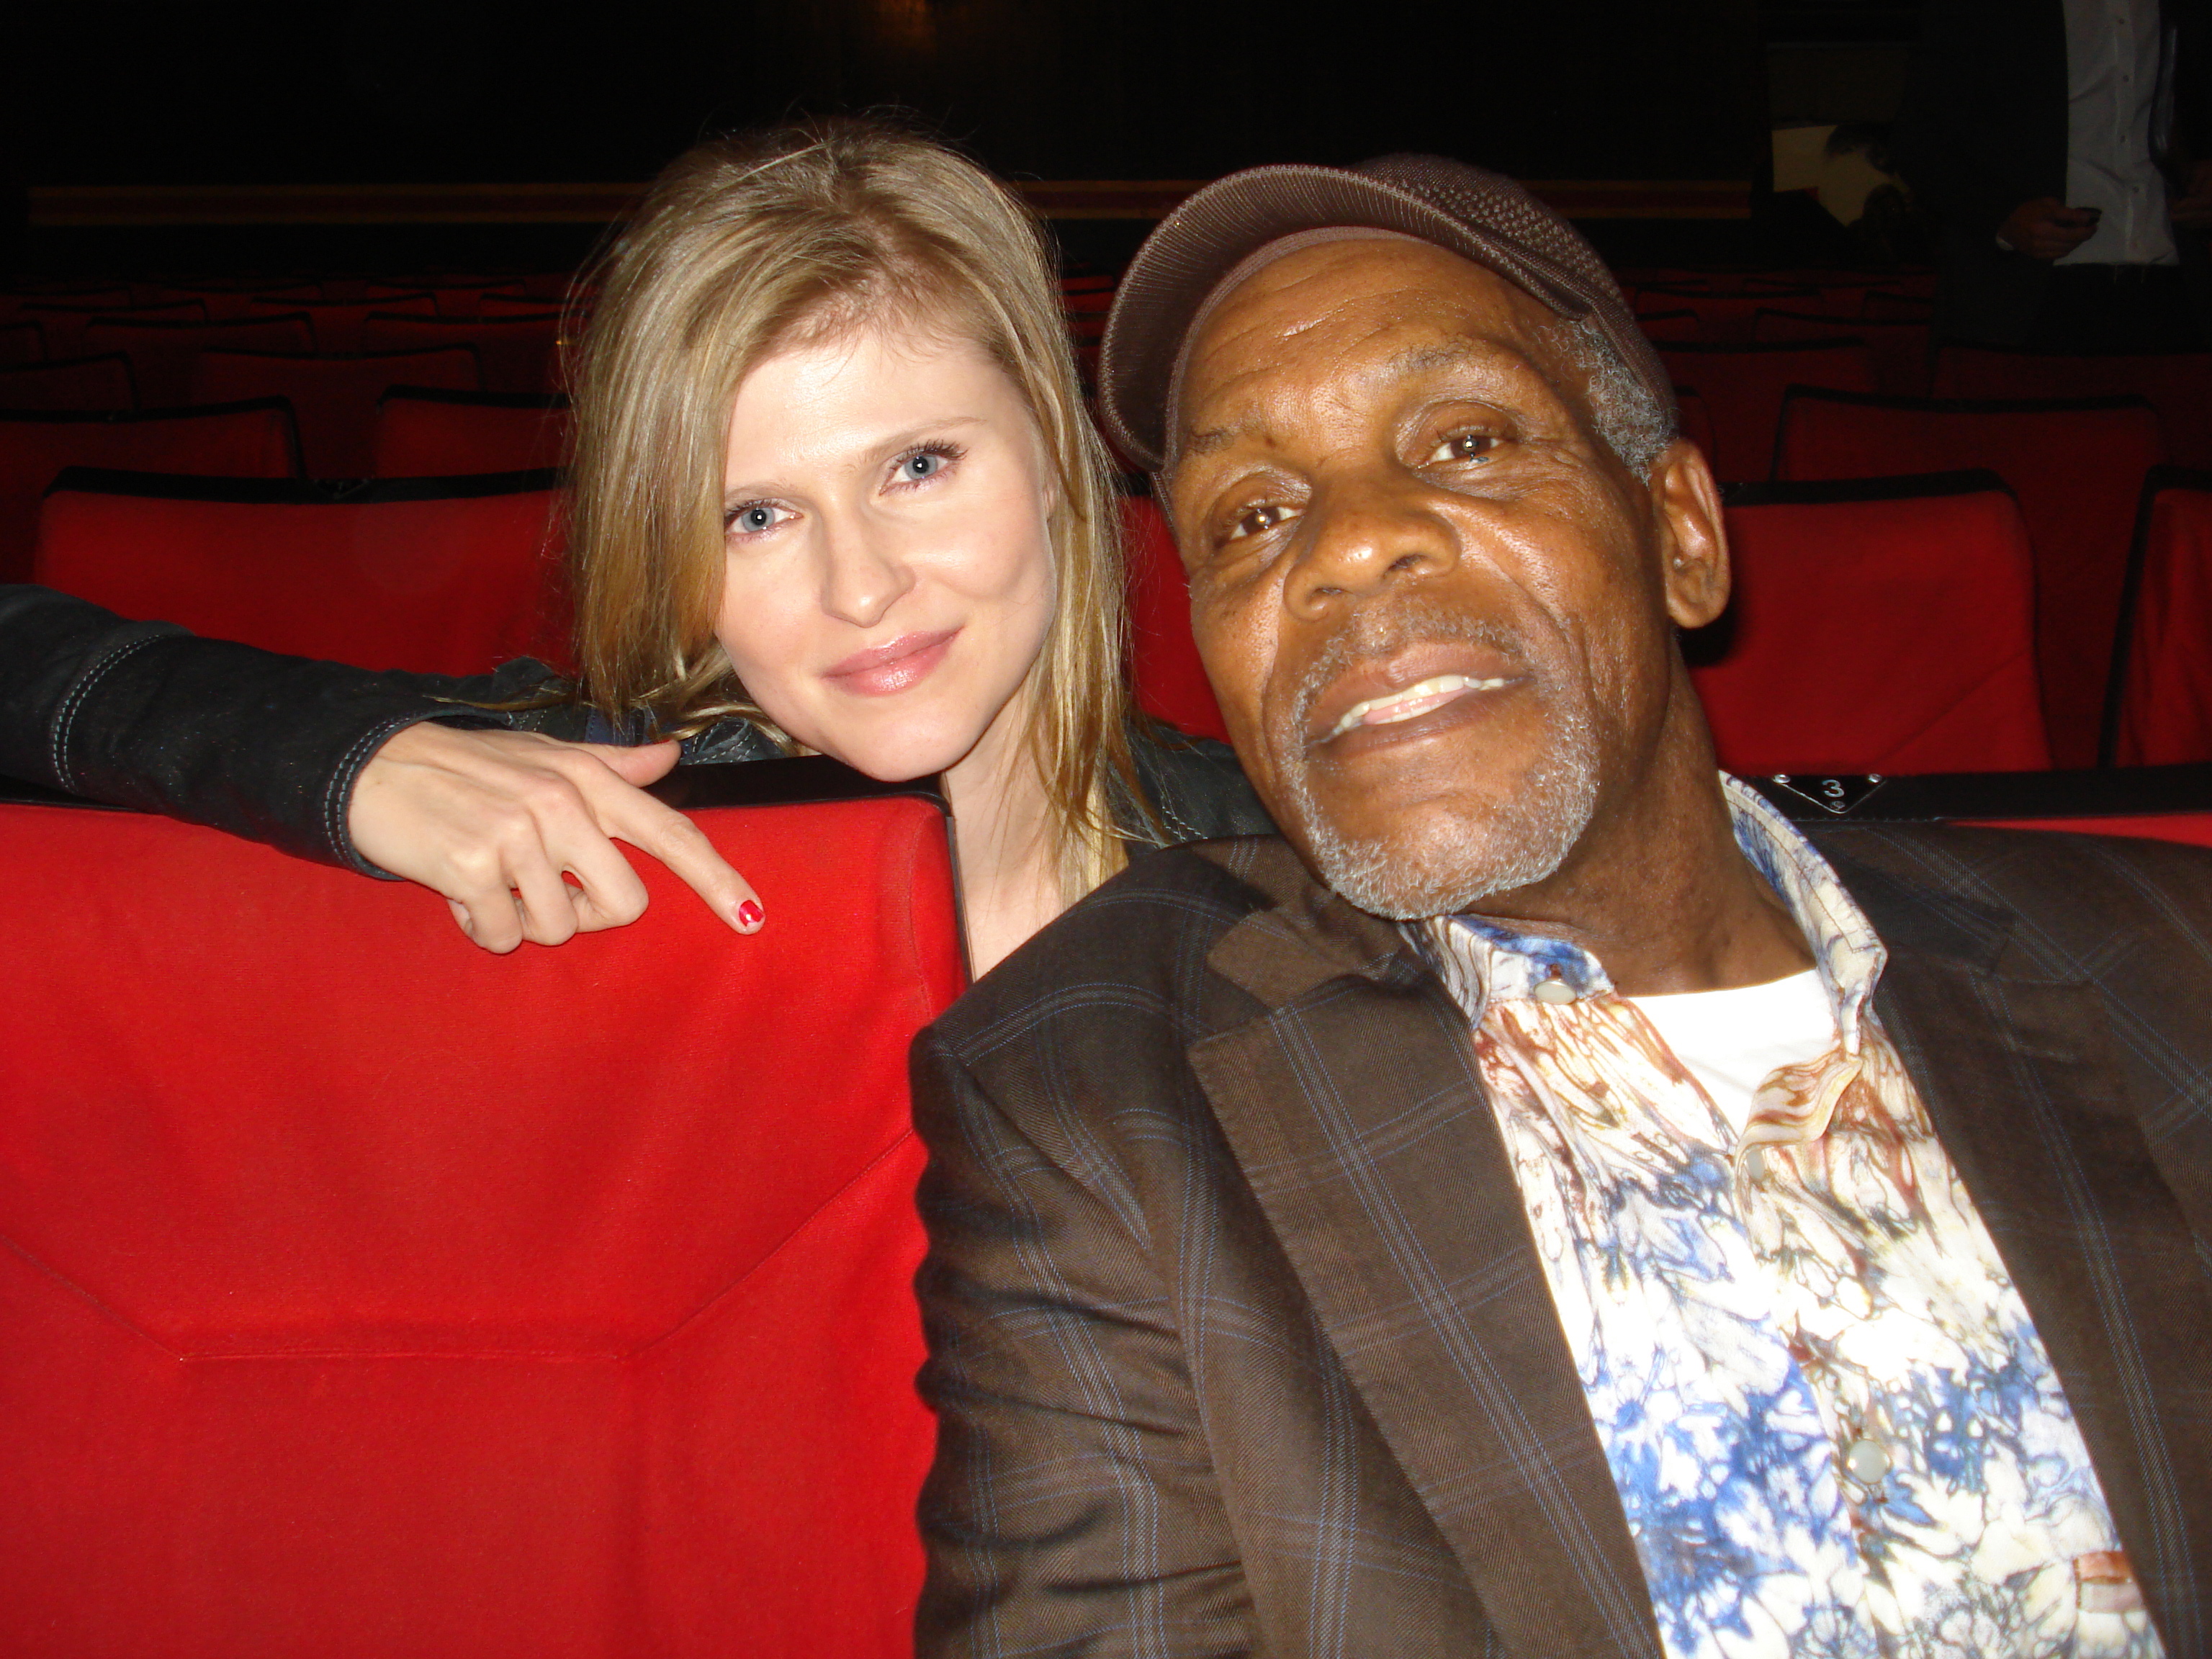 Danny Glover and Emilia Uutinen at the 